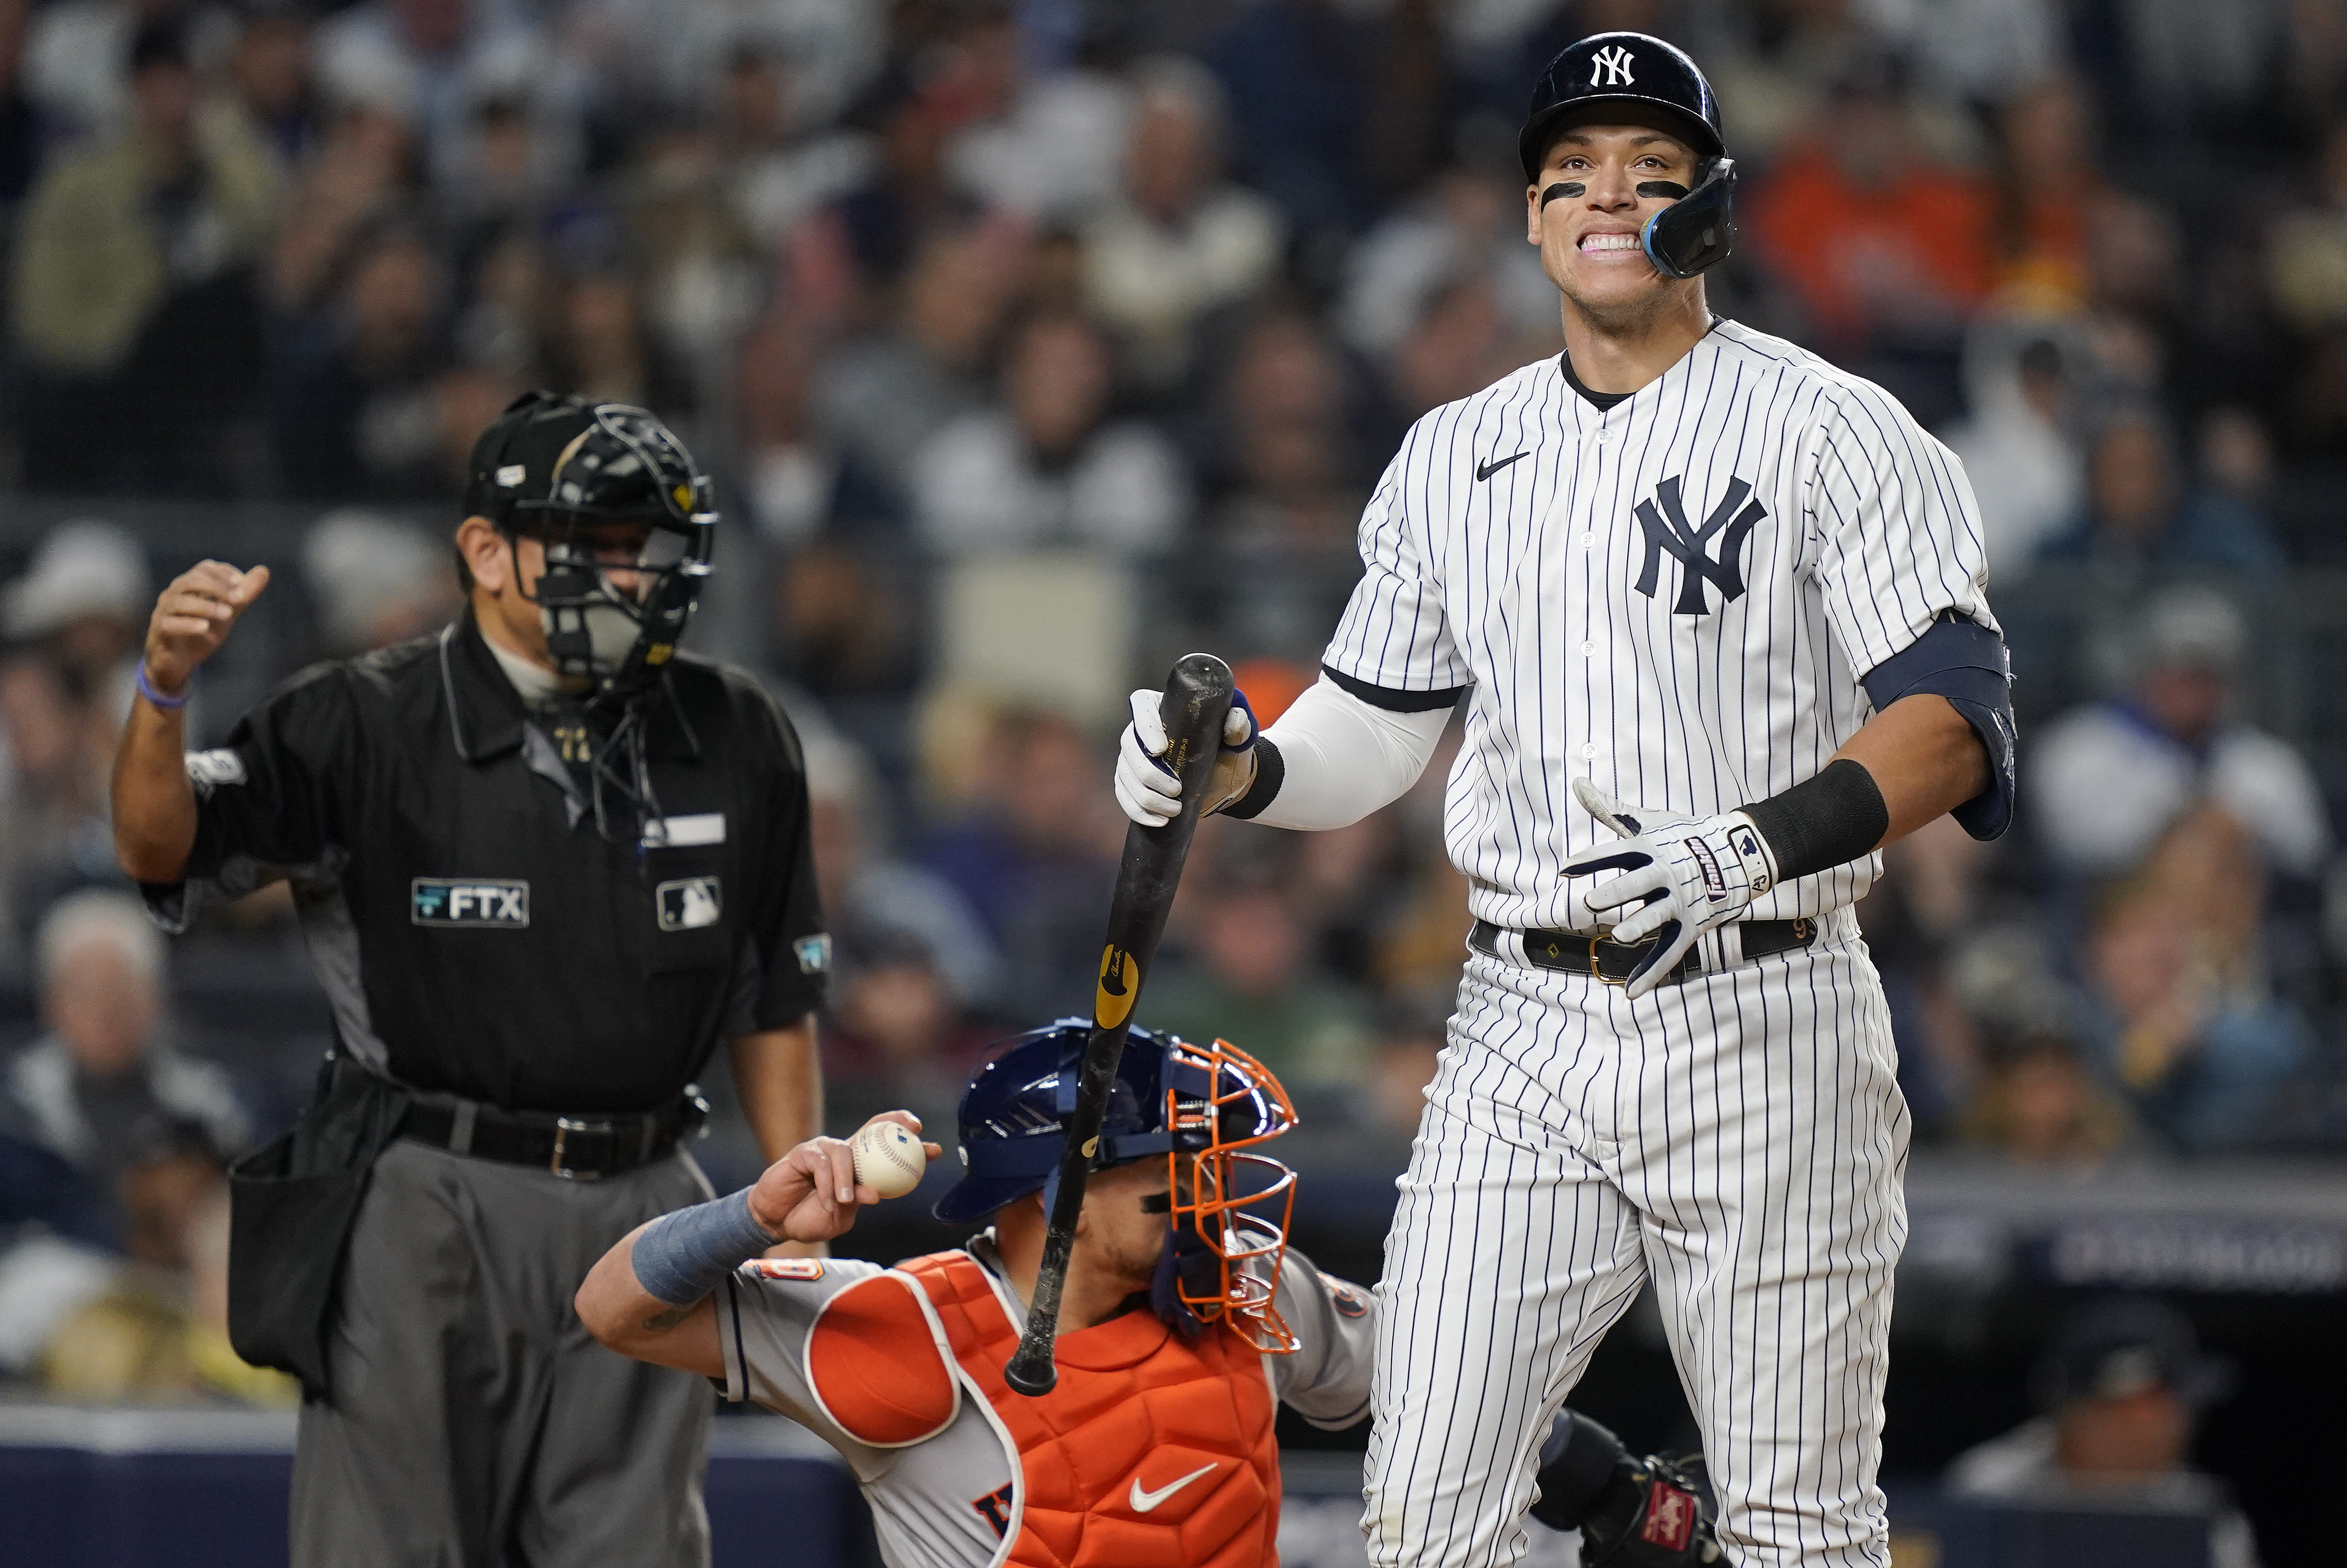 Klapisch: Aaron Judge to first base? Maybe someday